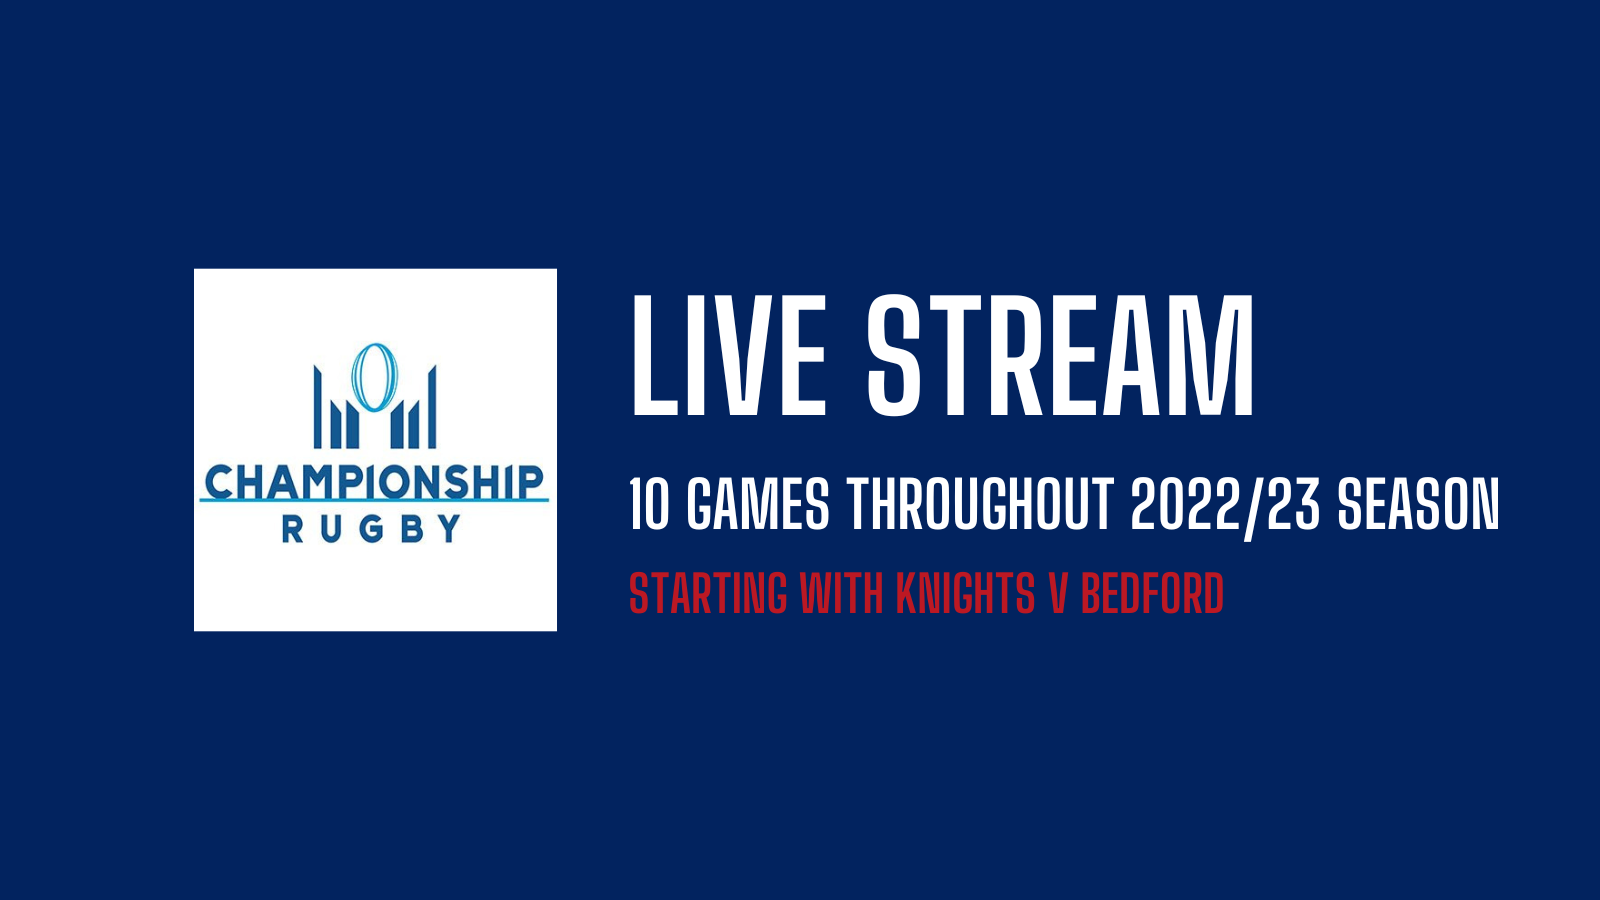 rugby live stream 2022